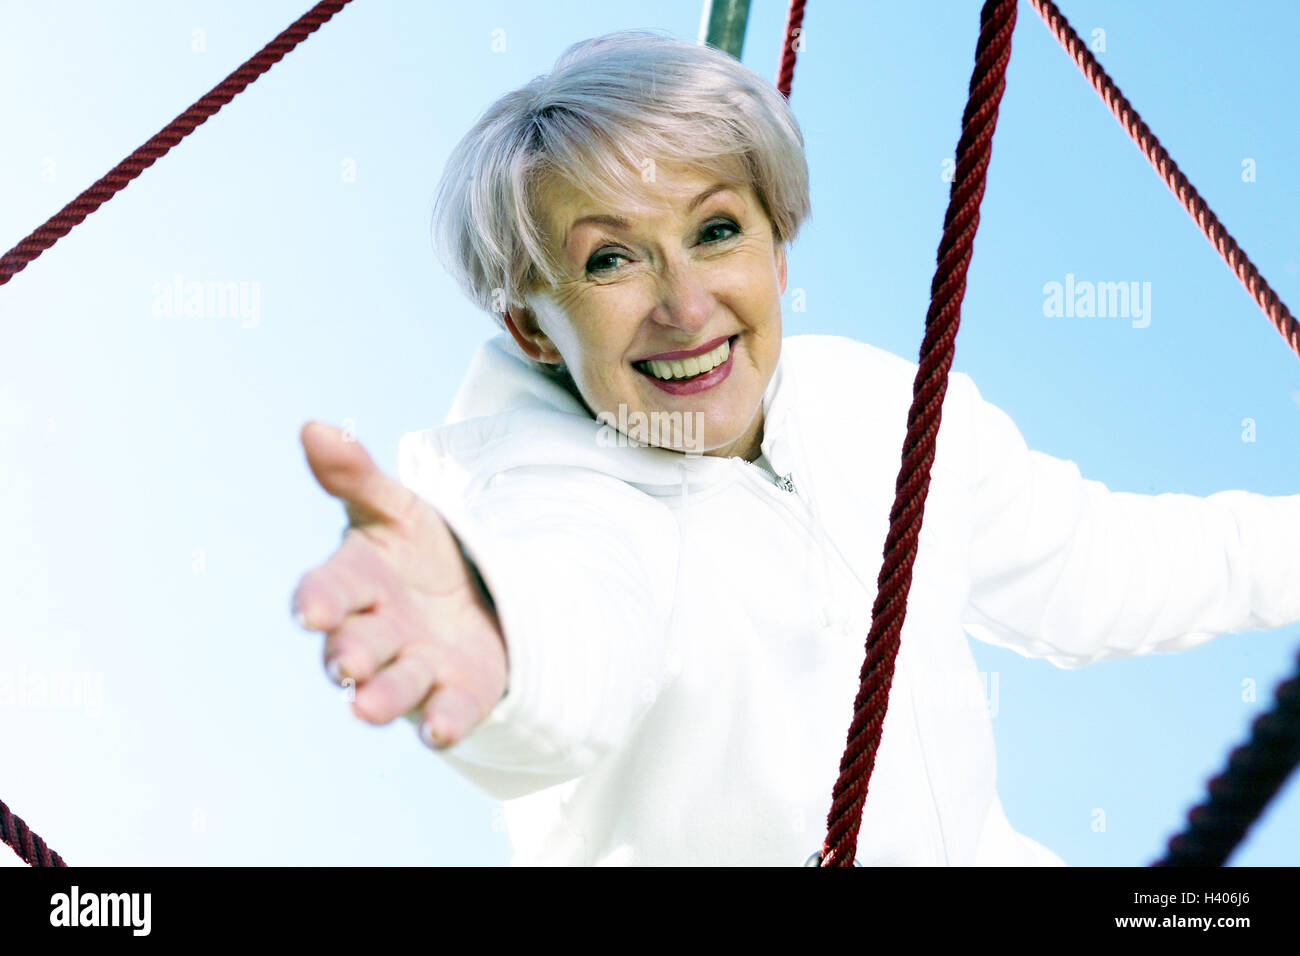 senior, casual wear, junglegym, laughing, putting forth one's hand, happy, help,portrait Stock Photo